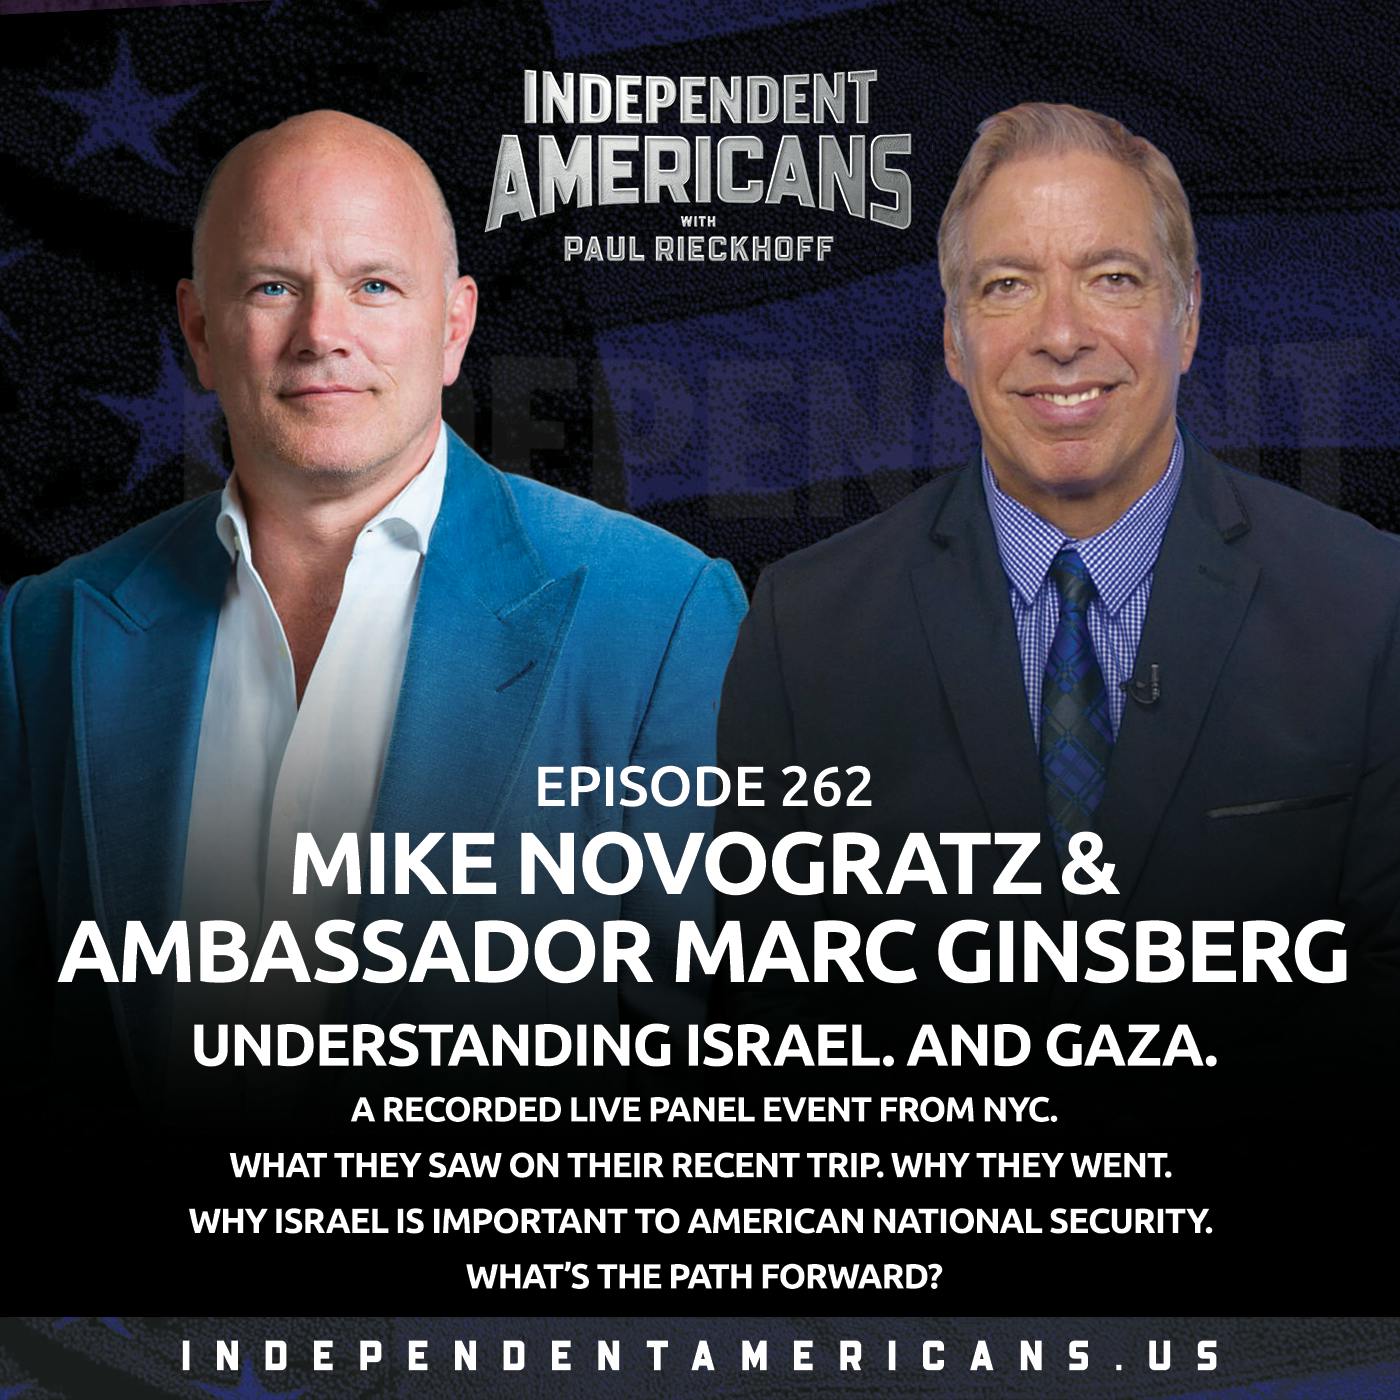 262. Mike Novogratz & Ambassador Marc Ginsberg. Understanding Israel. And Gaza. A Recorded Live Panel Event from NYC. What They Saw On Their Recent Trip. Why They Went. Why Israel is Important to American National Security. What’s the Path Forward?